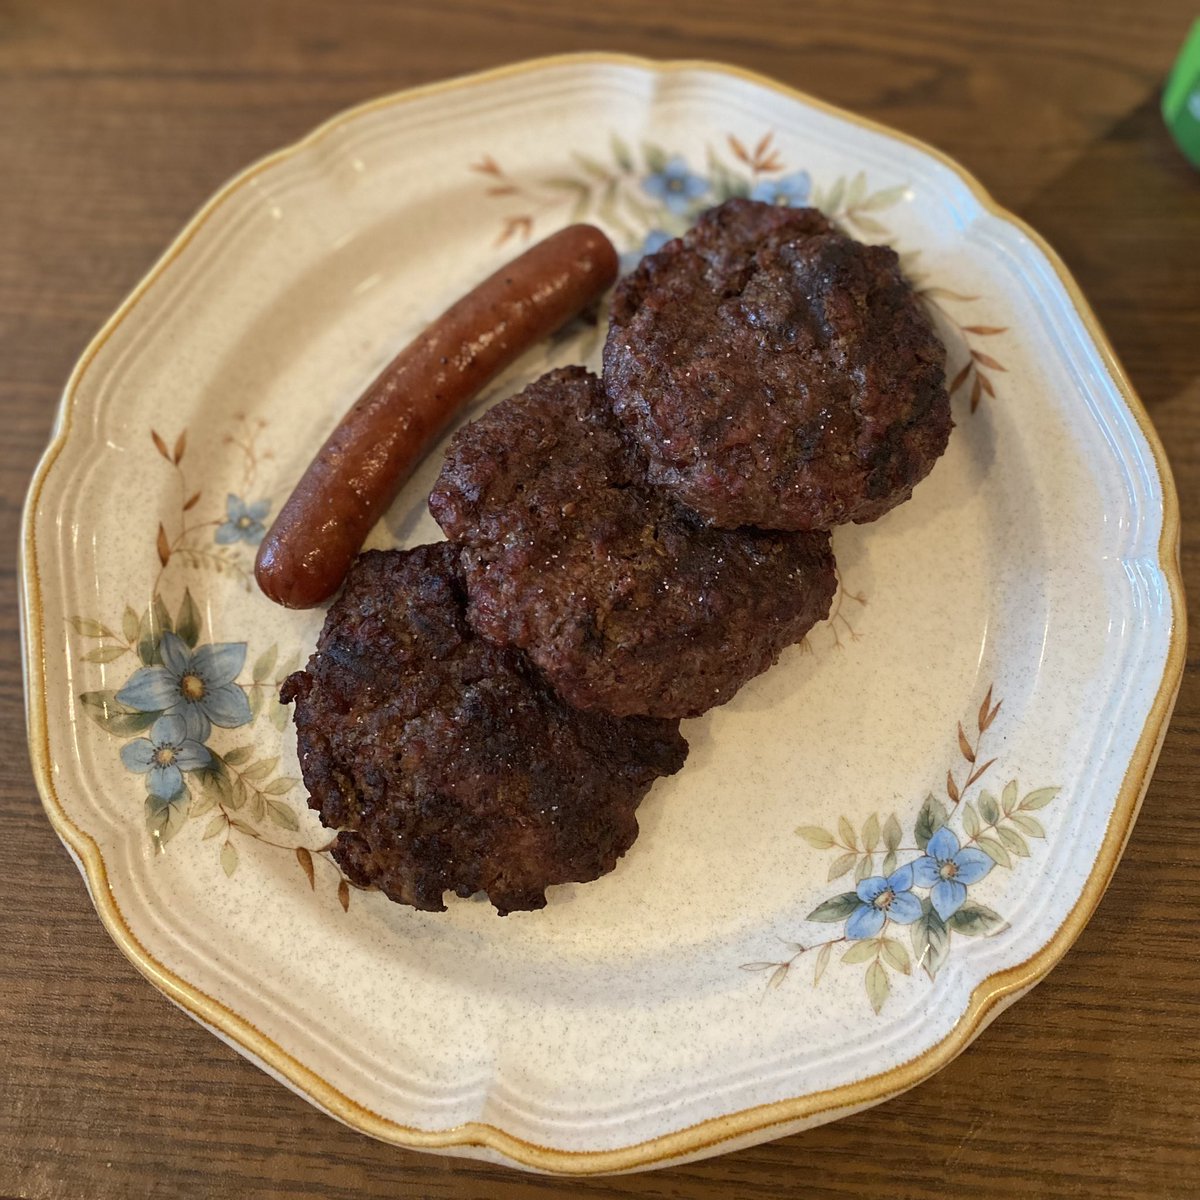 My first meal today was sardine patties (1 tin of sardines, 2 egg yolks, 1 tbsp beef gelatin & cooked in ghee)

I had grilled burger patties and a beef hotdog at my mother’s-in-law for dinner!

#Carnivore #carnivorediet #keto #ketodiet